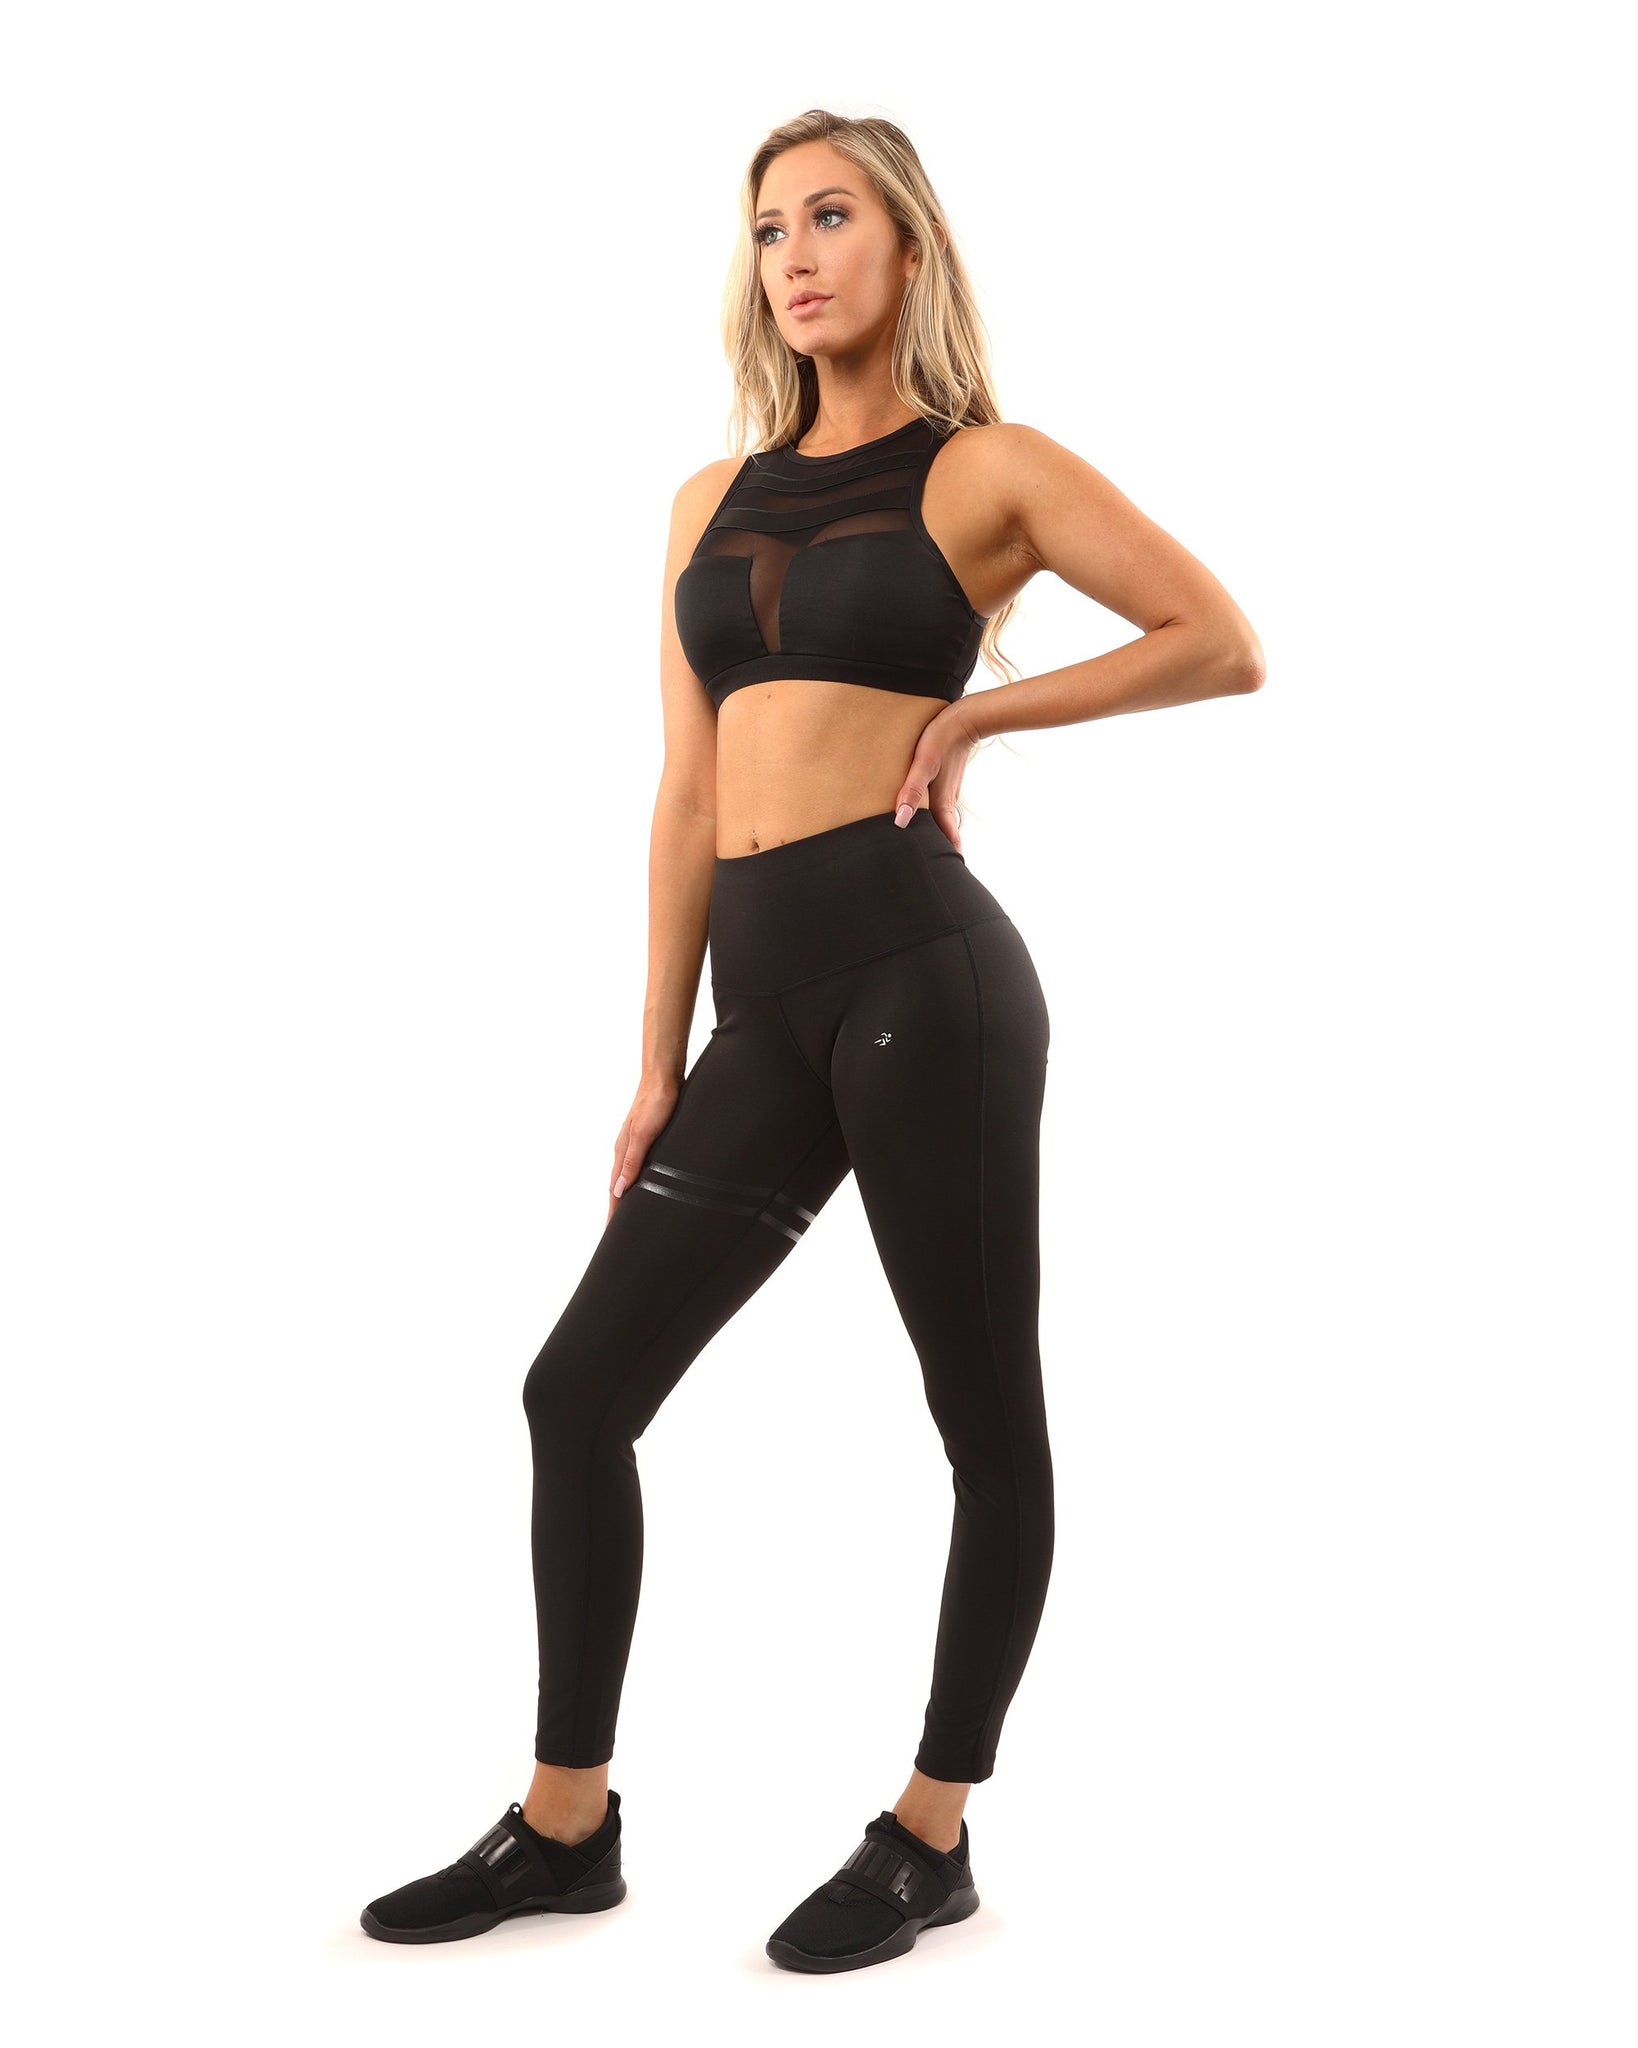 Spyder Active Women's Performance High Rise Legging Tight (X-Small